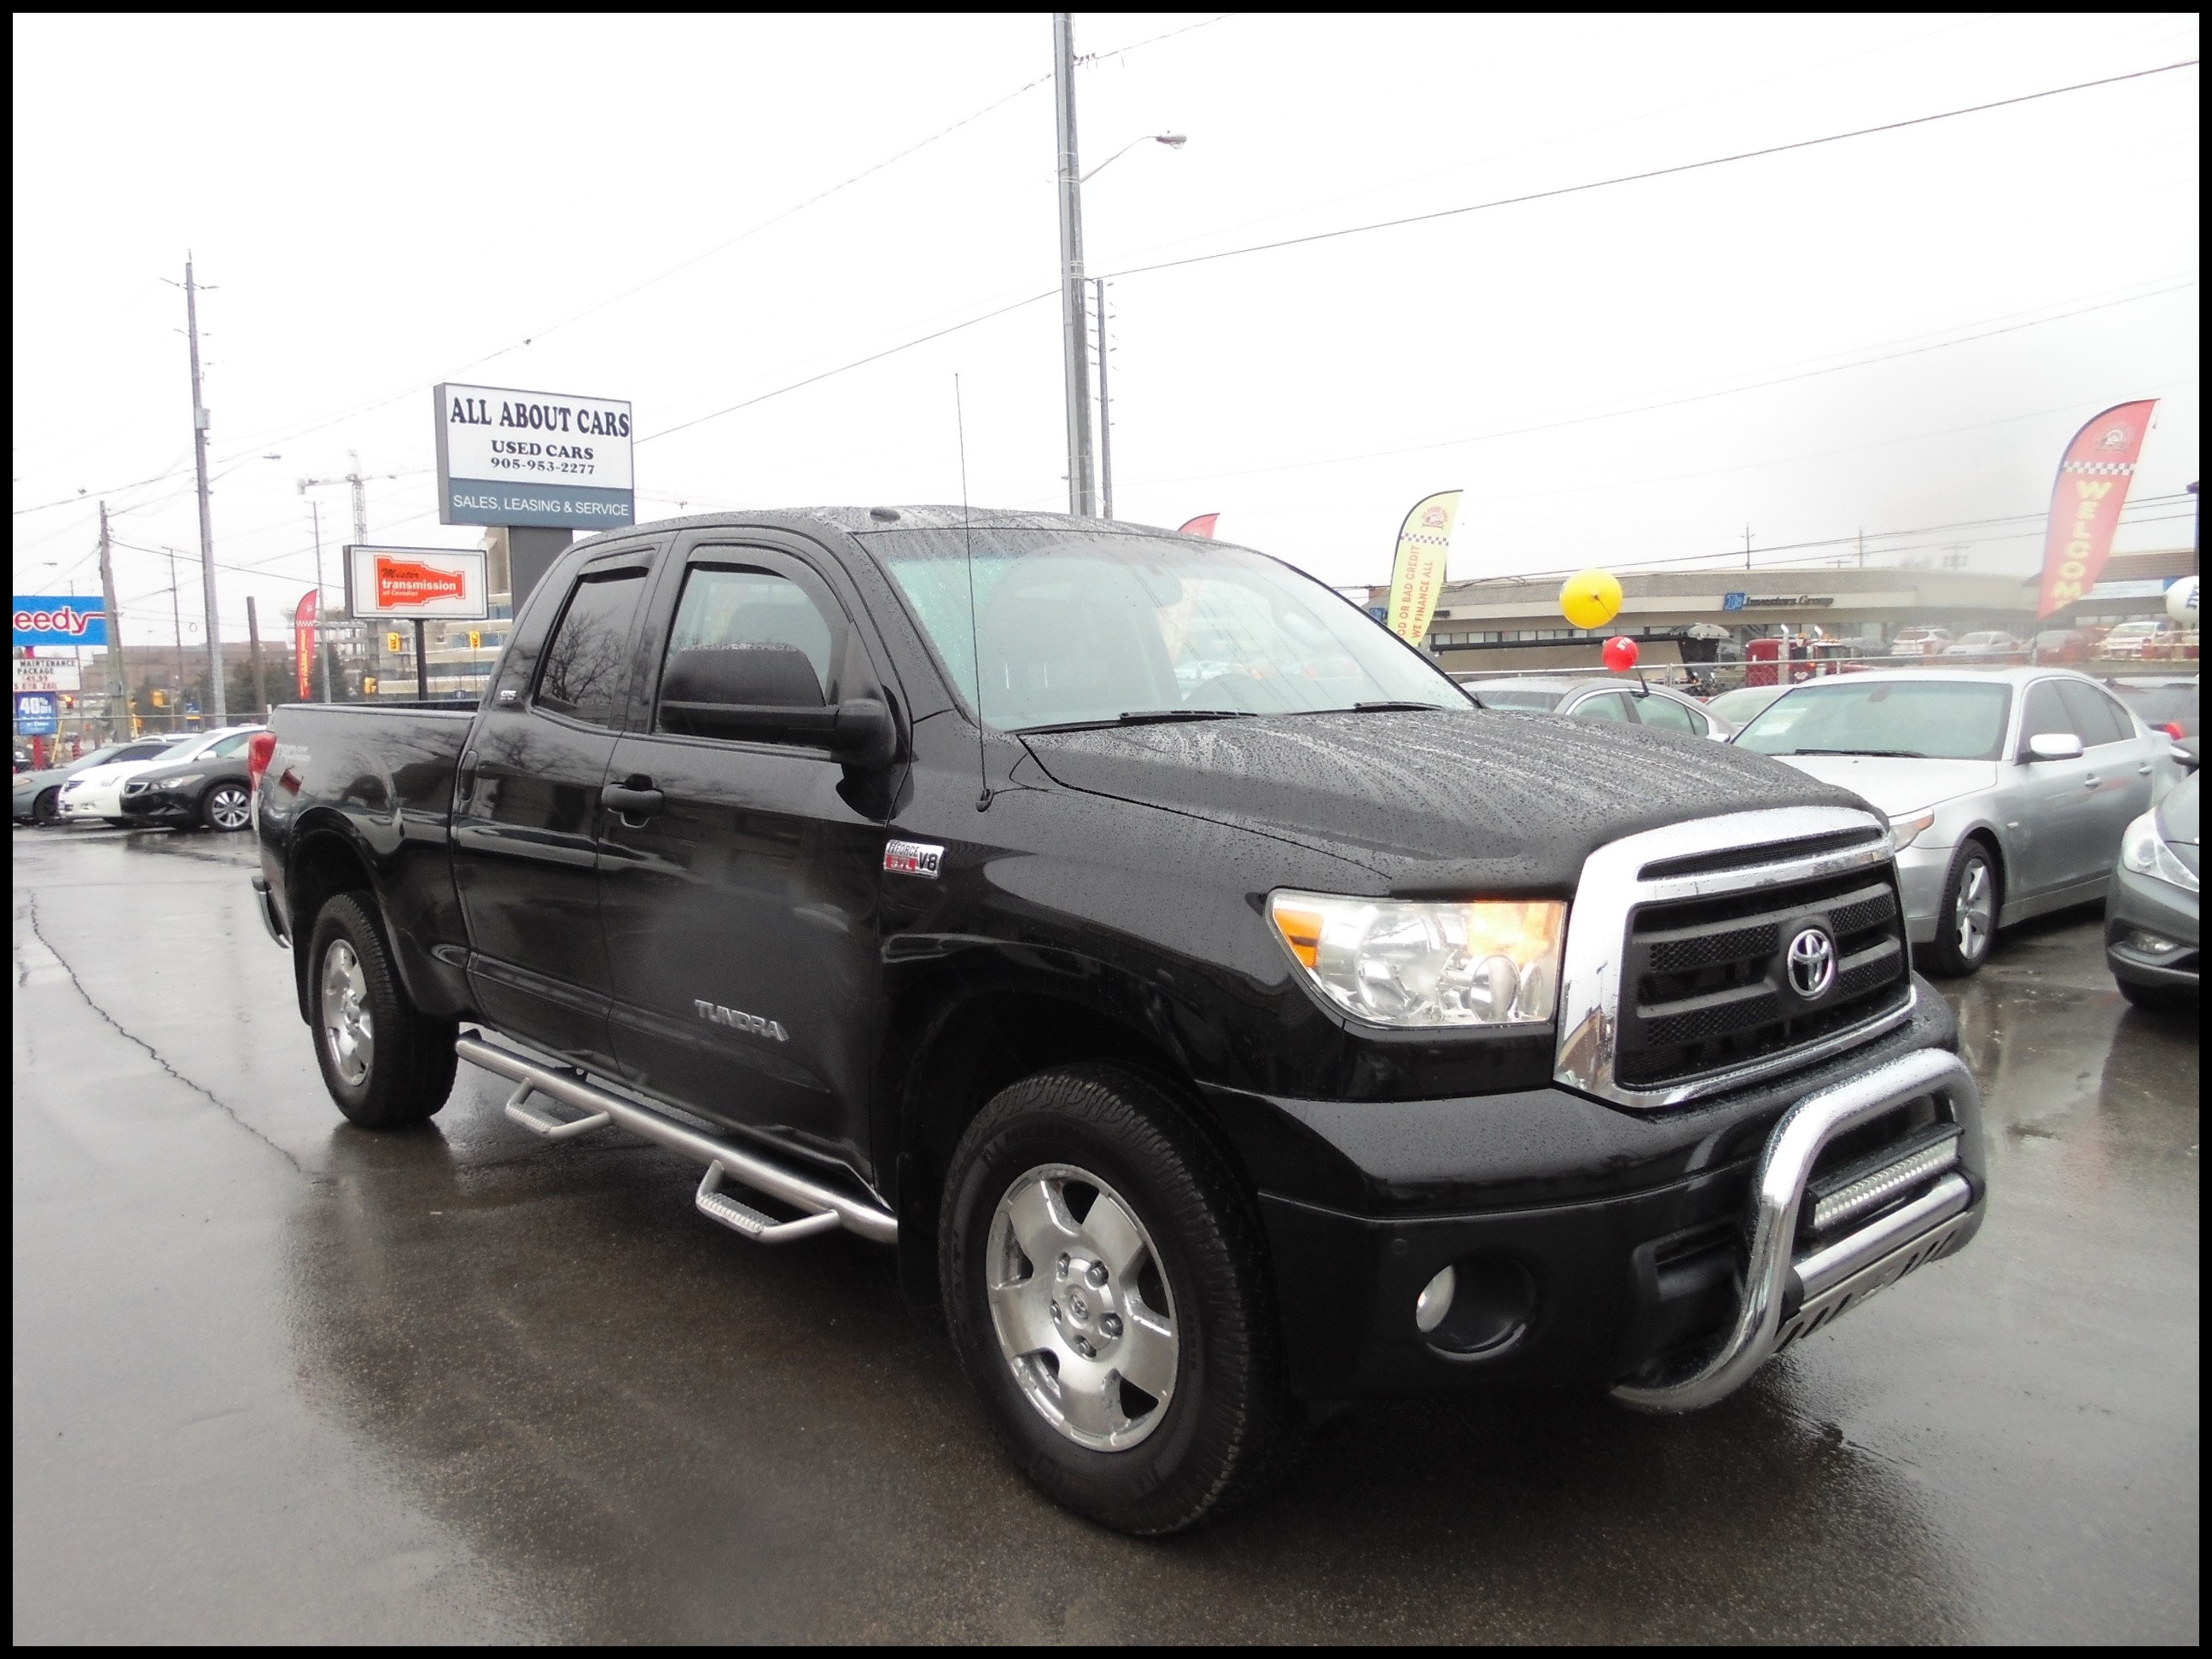 Hot 2010 toyota Tundra Best Used toyota Tundra for Sale In Knoxville Reviews